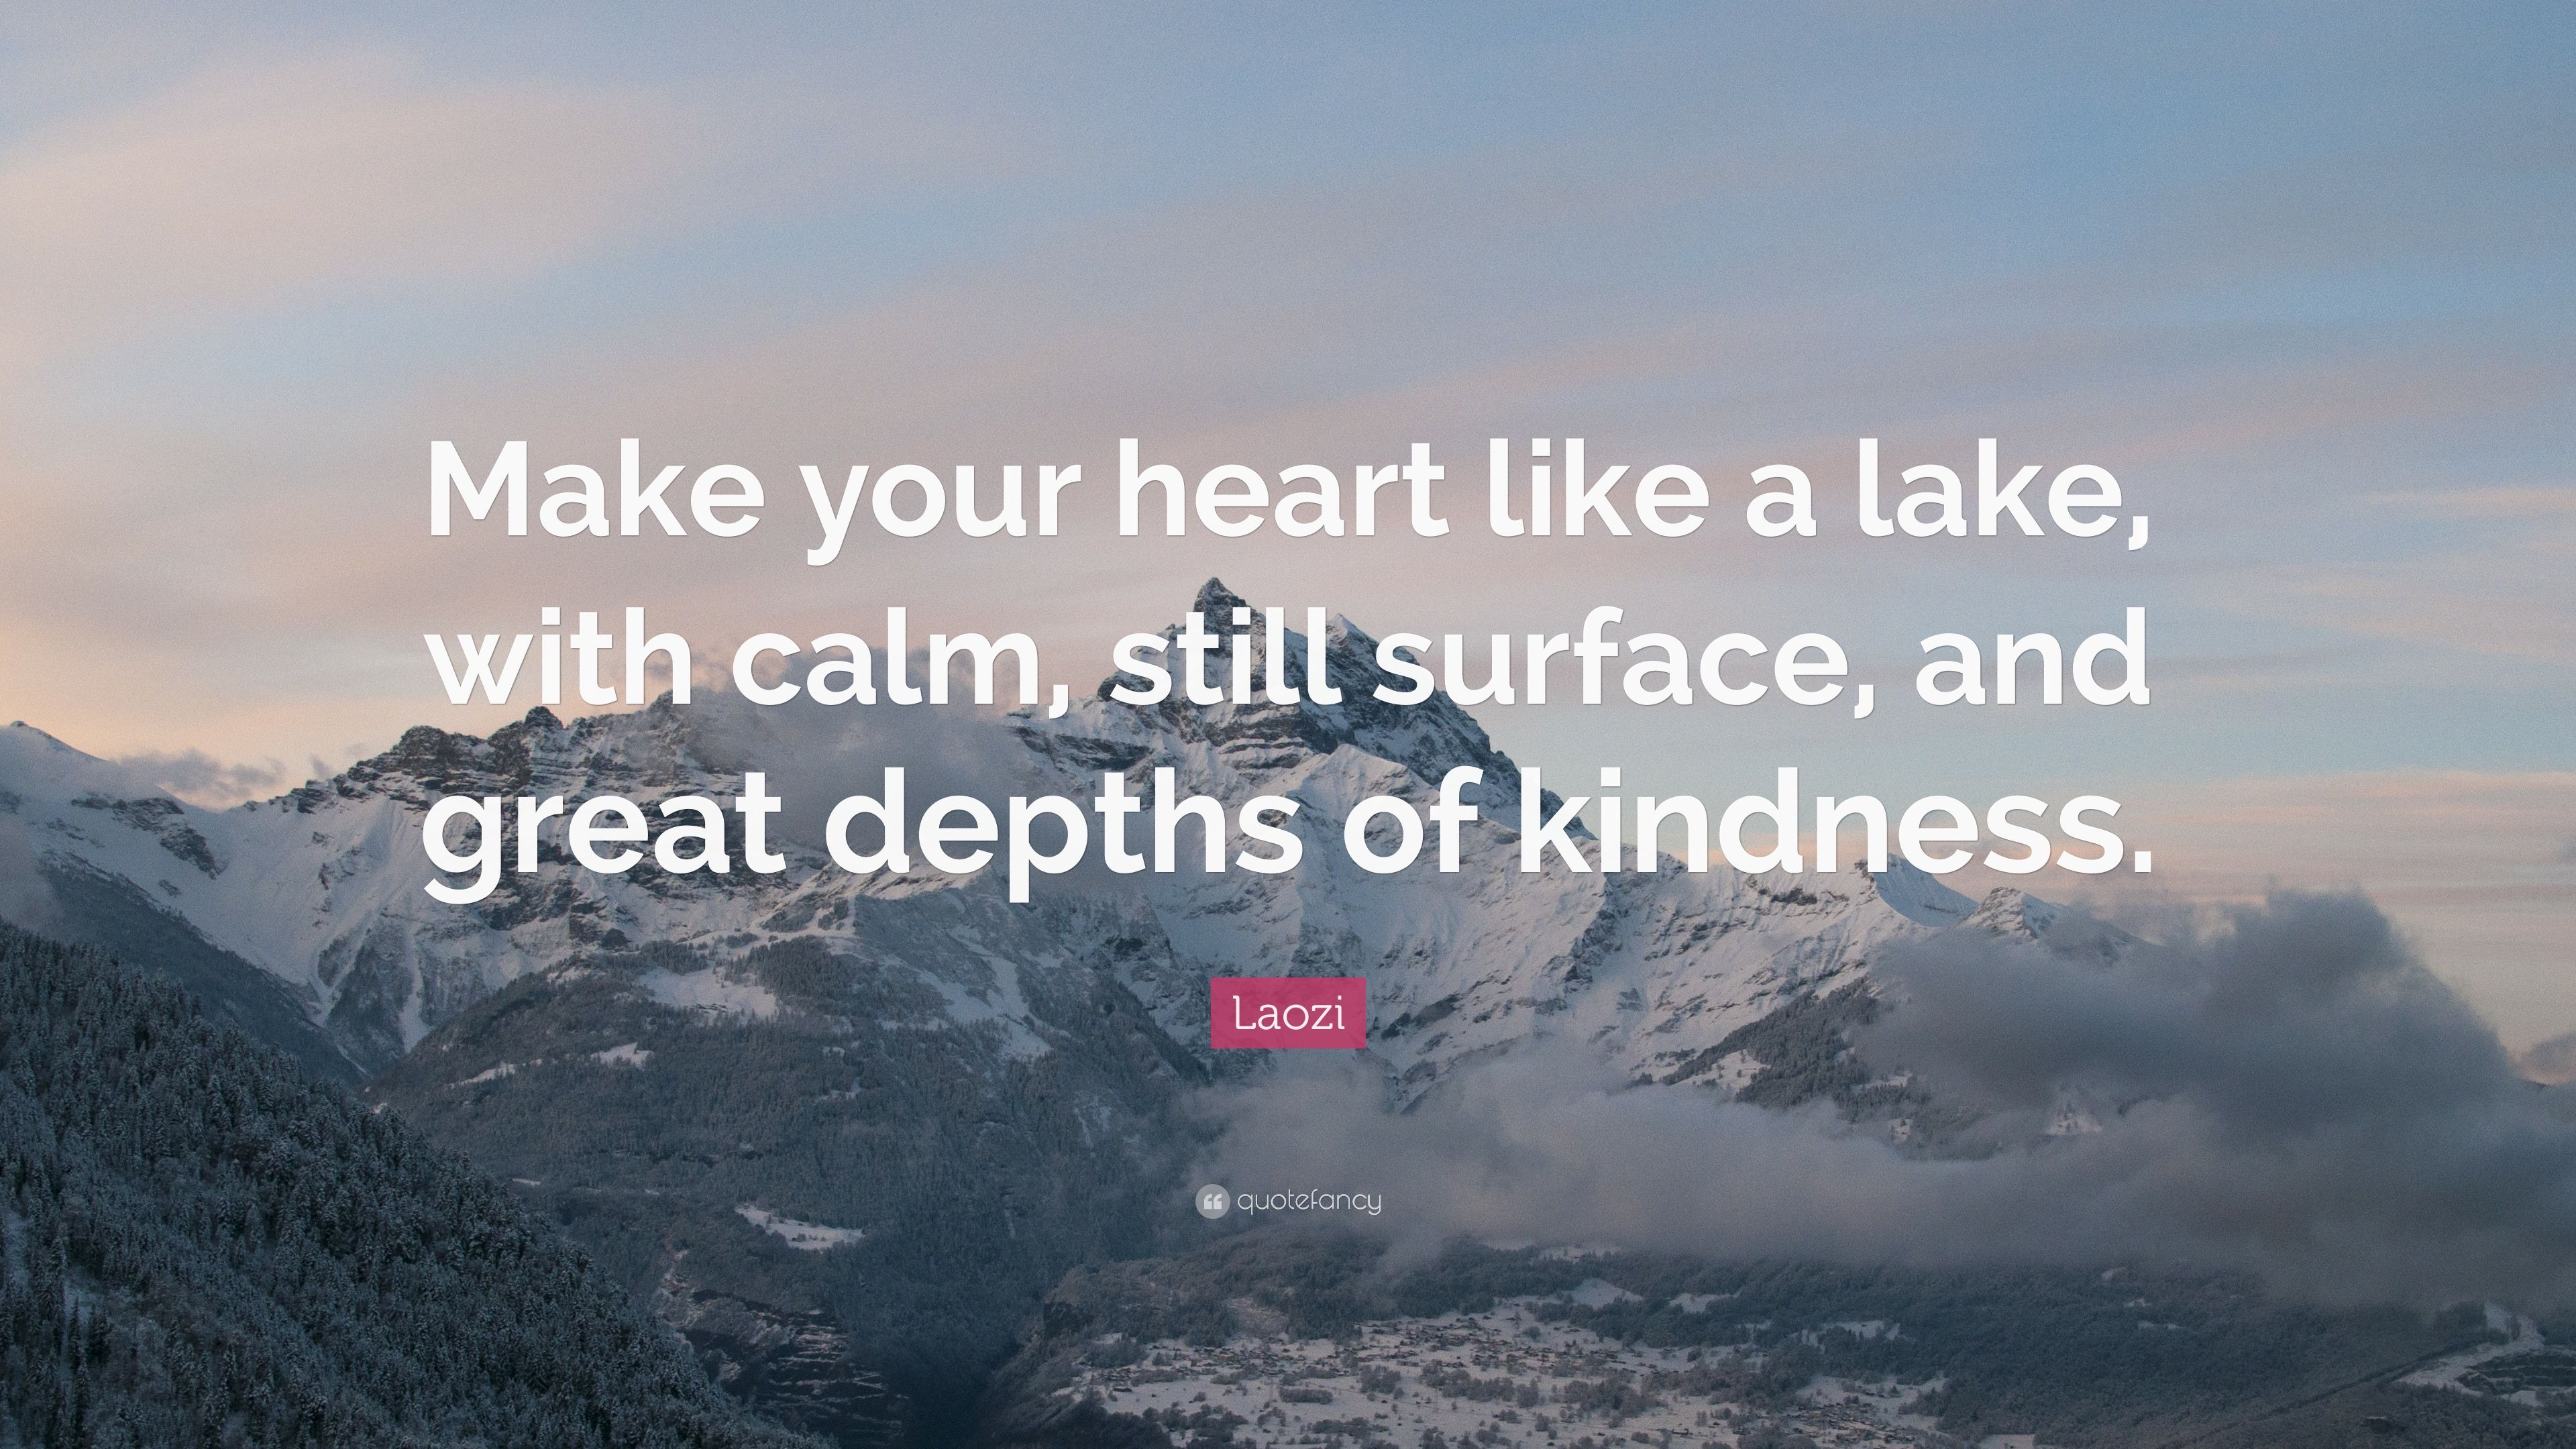 Laozi Quote: “Make your heart like a lake, with calm, still